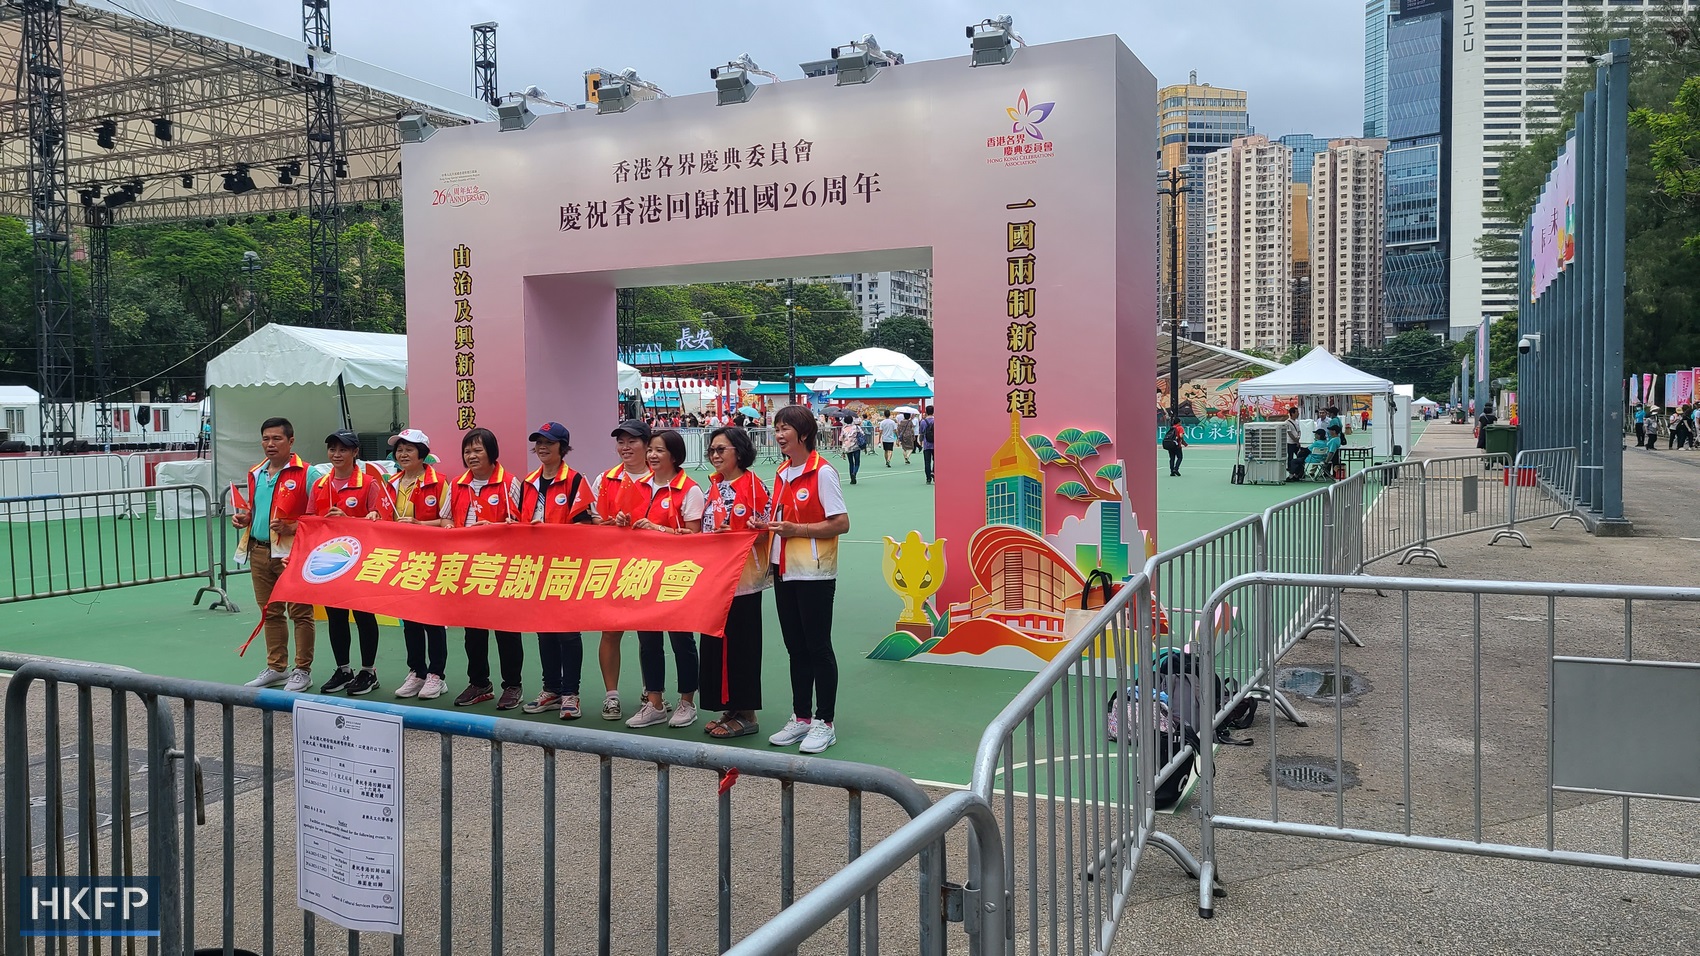 People pose with a banner outside the entrance to an event celebrating the 26th anniversary of Hong Kong's return to Chinese rule at Victoria Park on July 1, 2023. Photo: Irene Chan/HKFP.